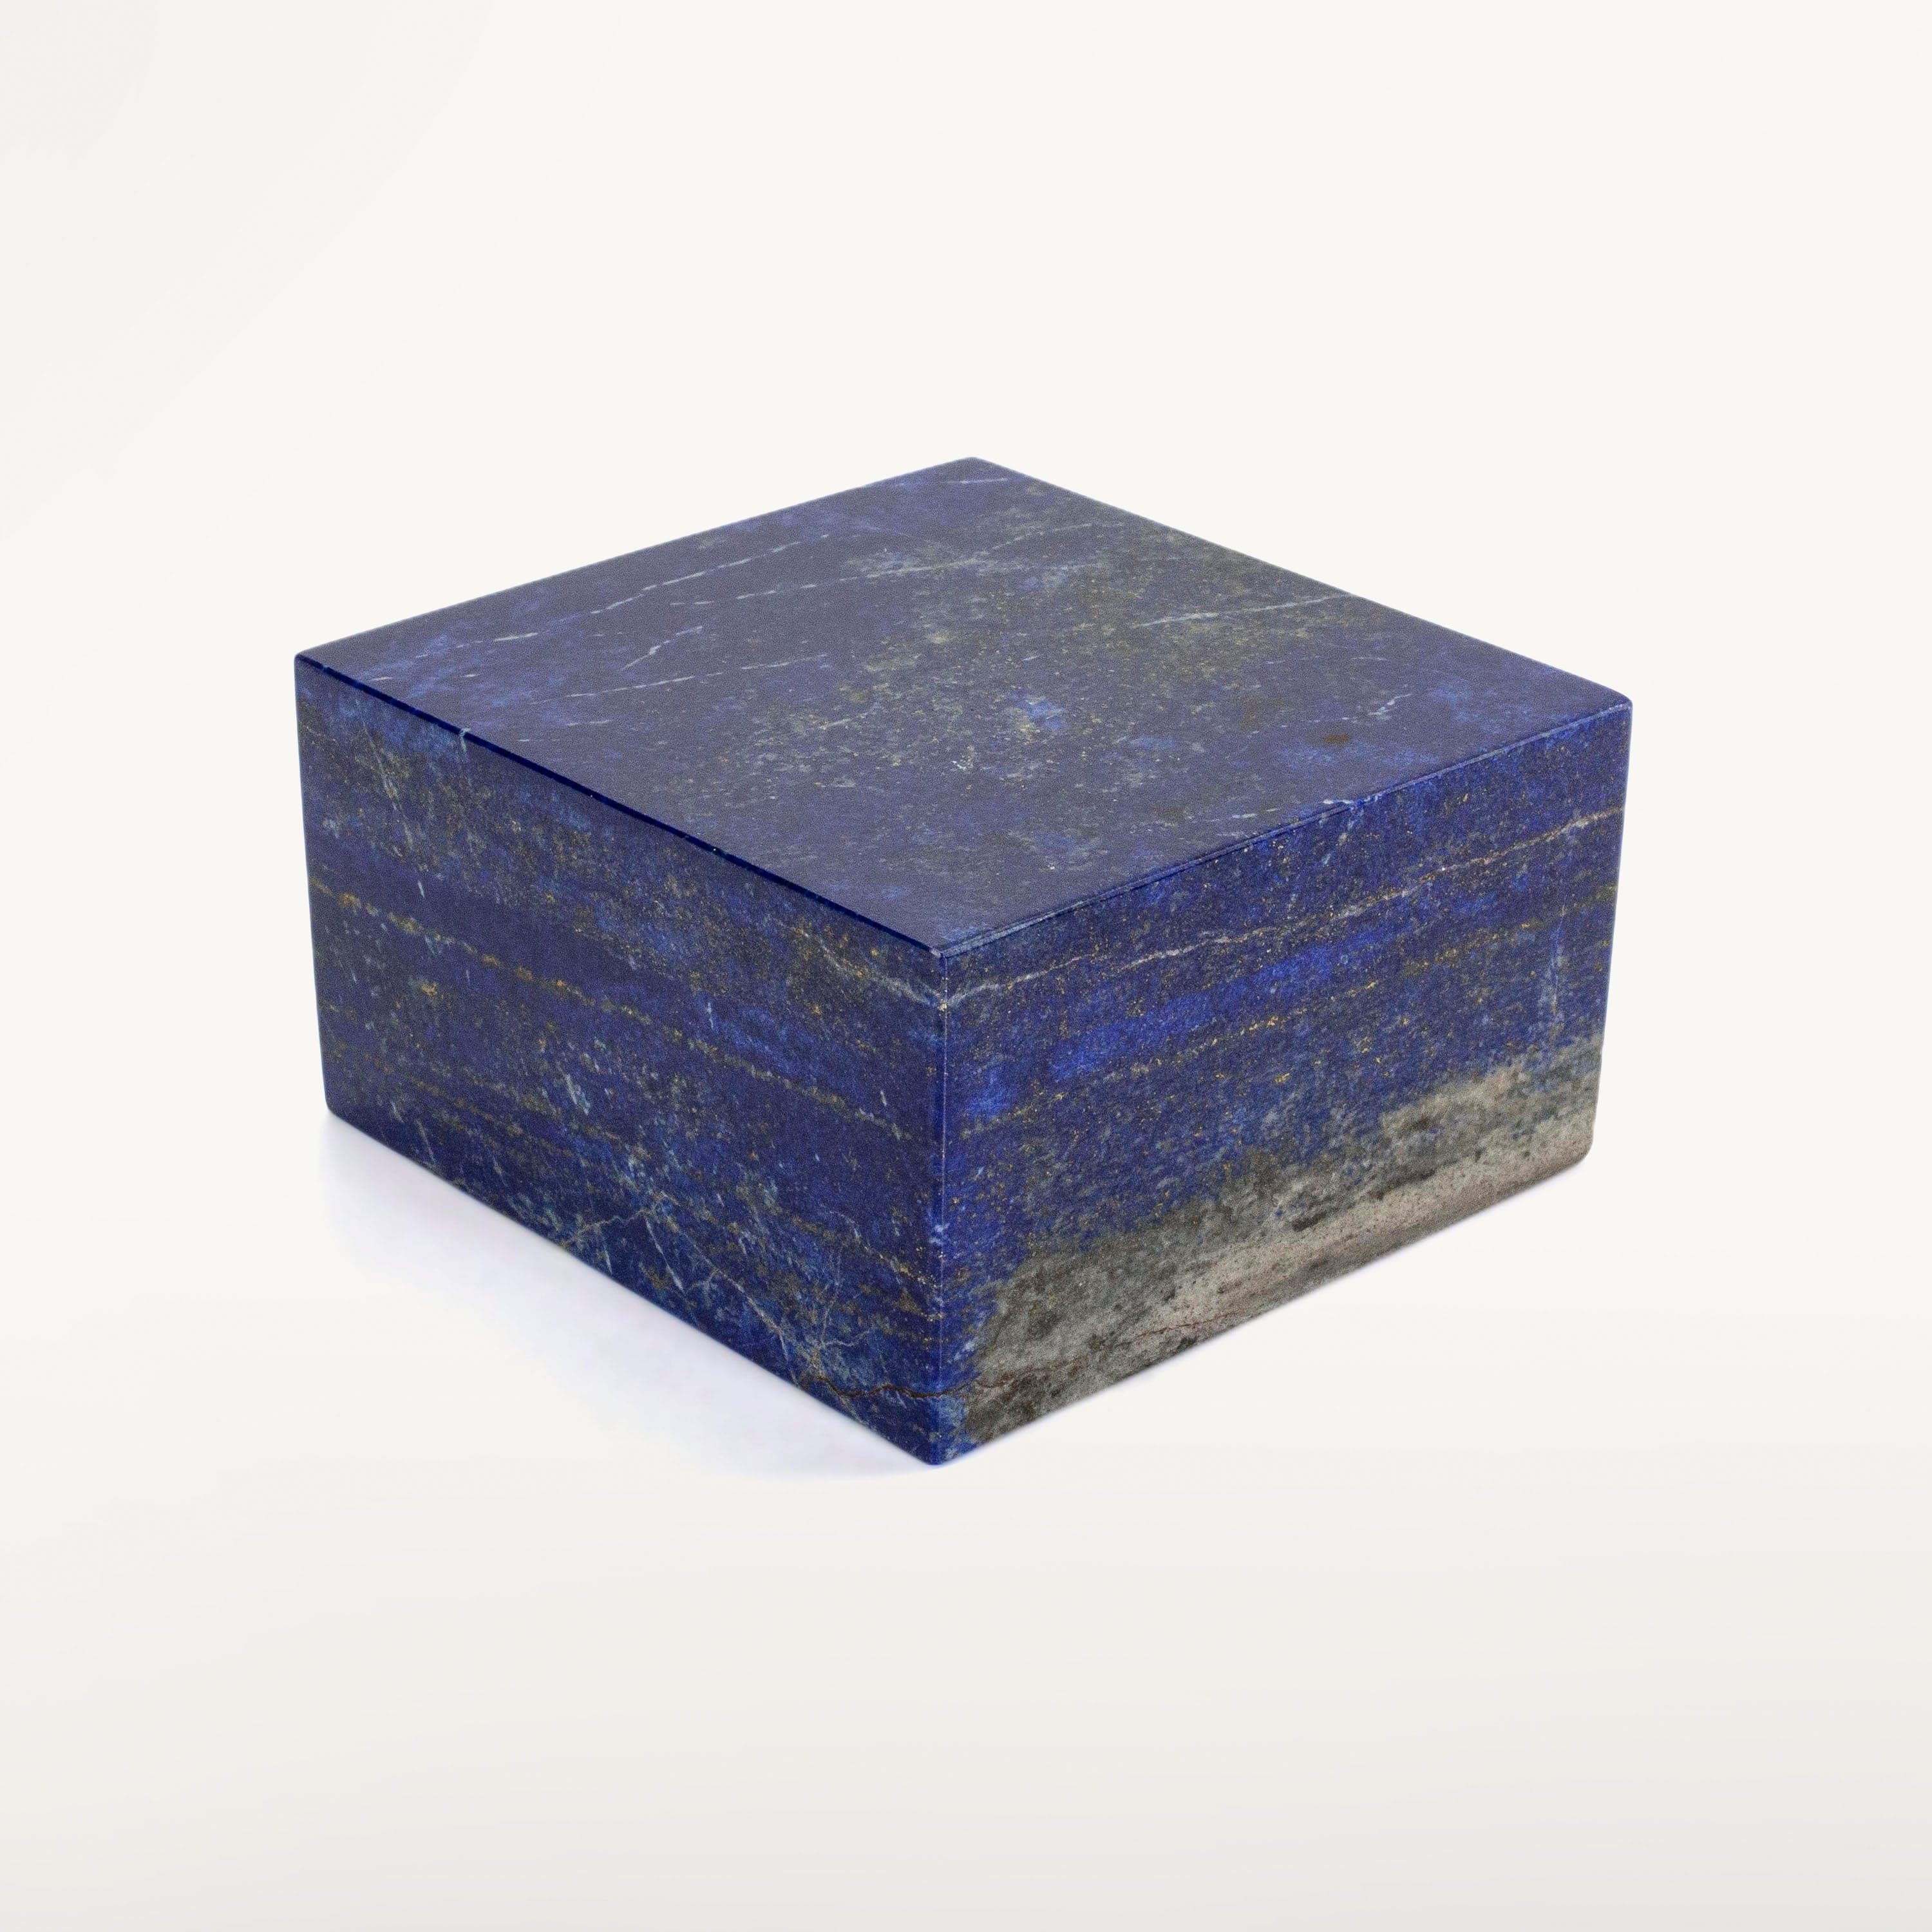 Kalifano Lapis Lapis Lazuil Cube from Afghanistan - 875 g / 1.9 lbs LP1000.003